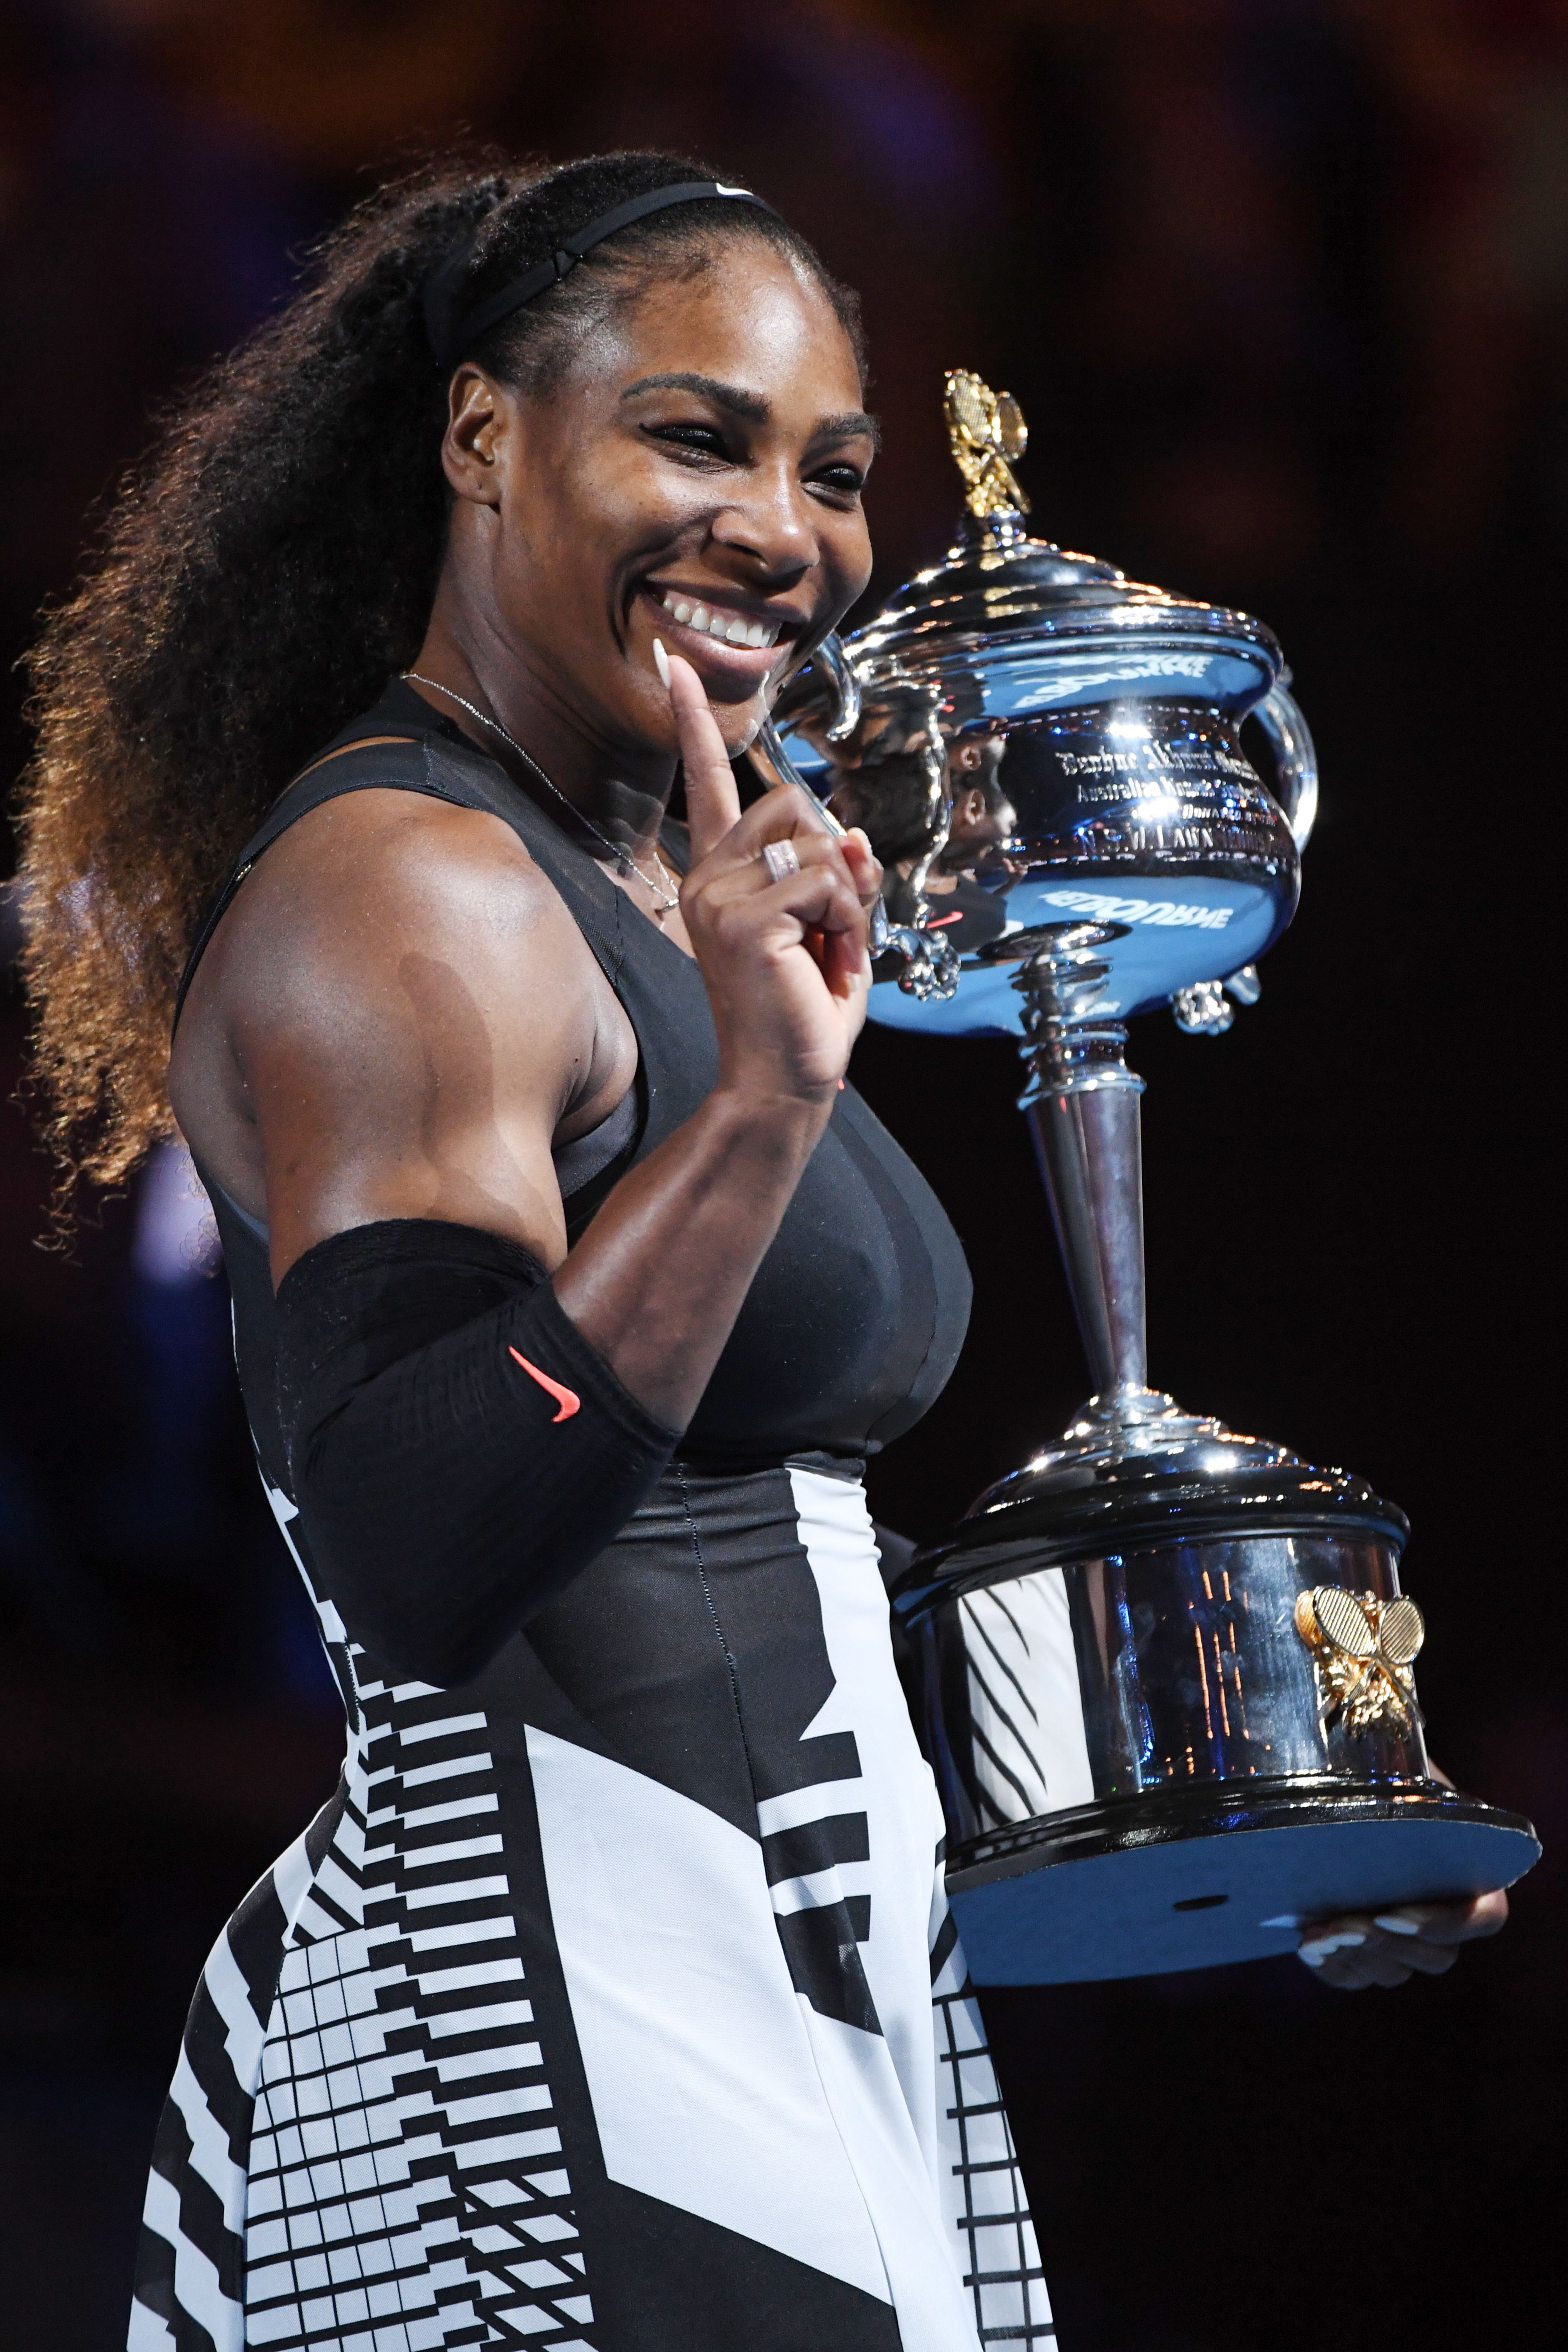 Serena Williams with the championship trophy during the awards ceremony after her victory at the Australian Open tennis tournament in Melbourne on January 28, 2017. | Source: Getty Images